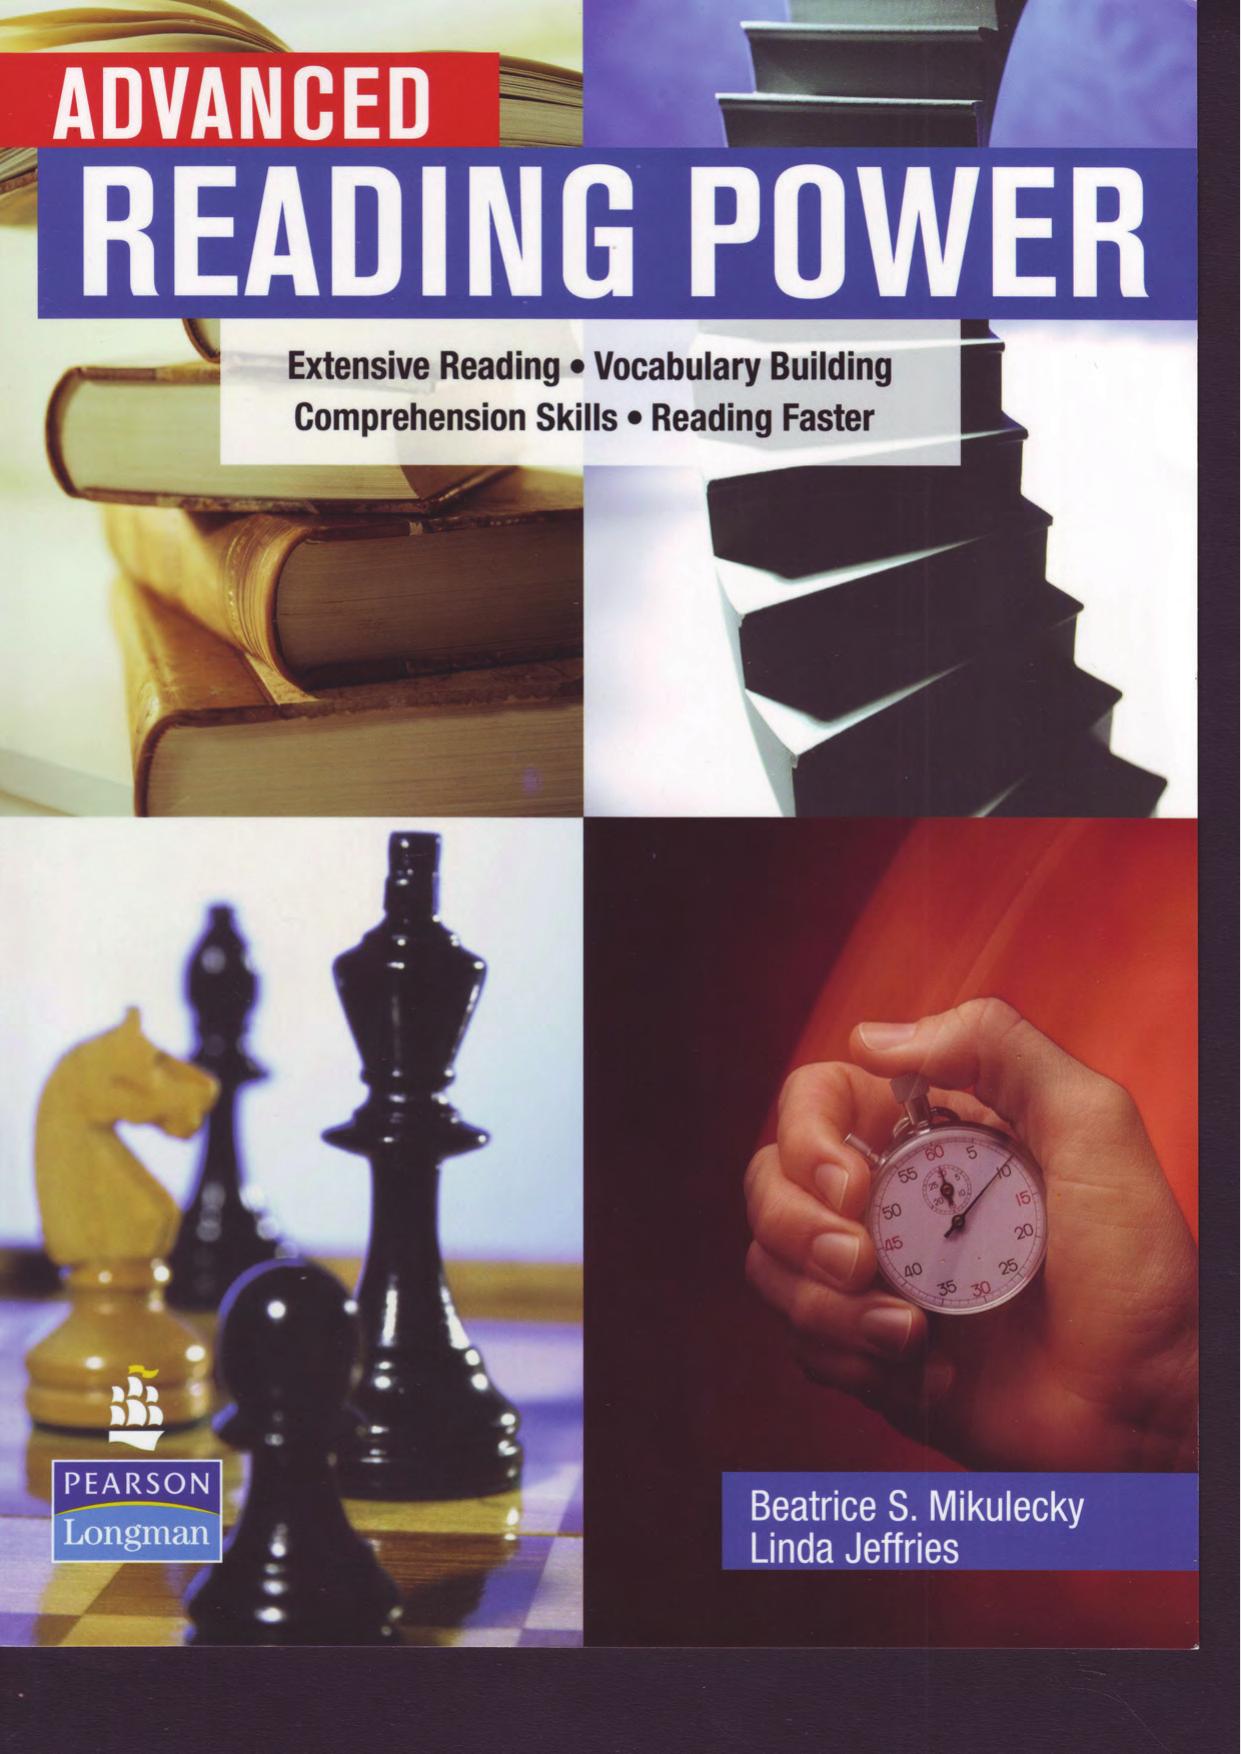 Advanced Reading Power - Extensive Reading, Vocabulary Building, Comprehension Skills, Reading Faster.pdf by jilanishanoor